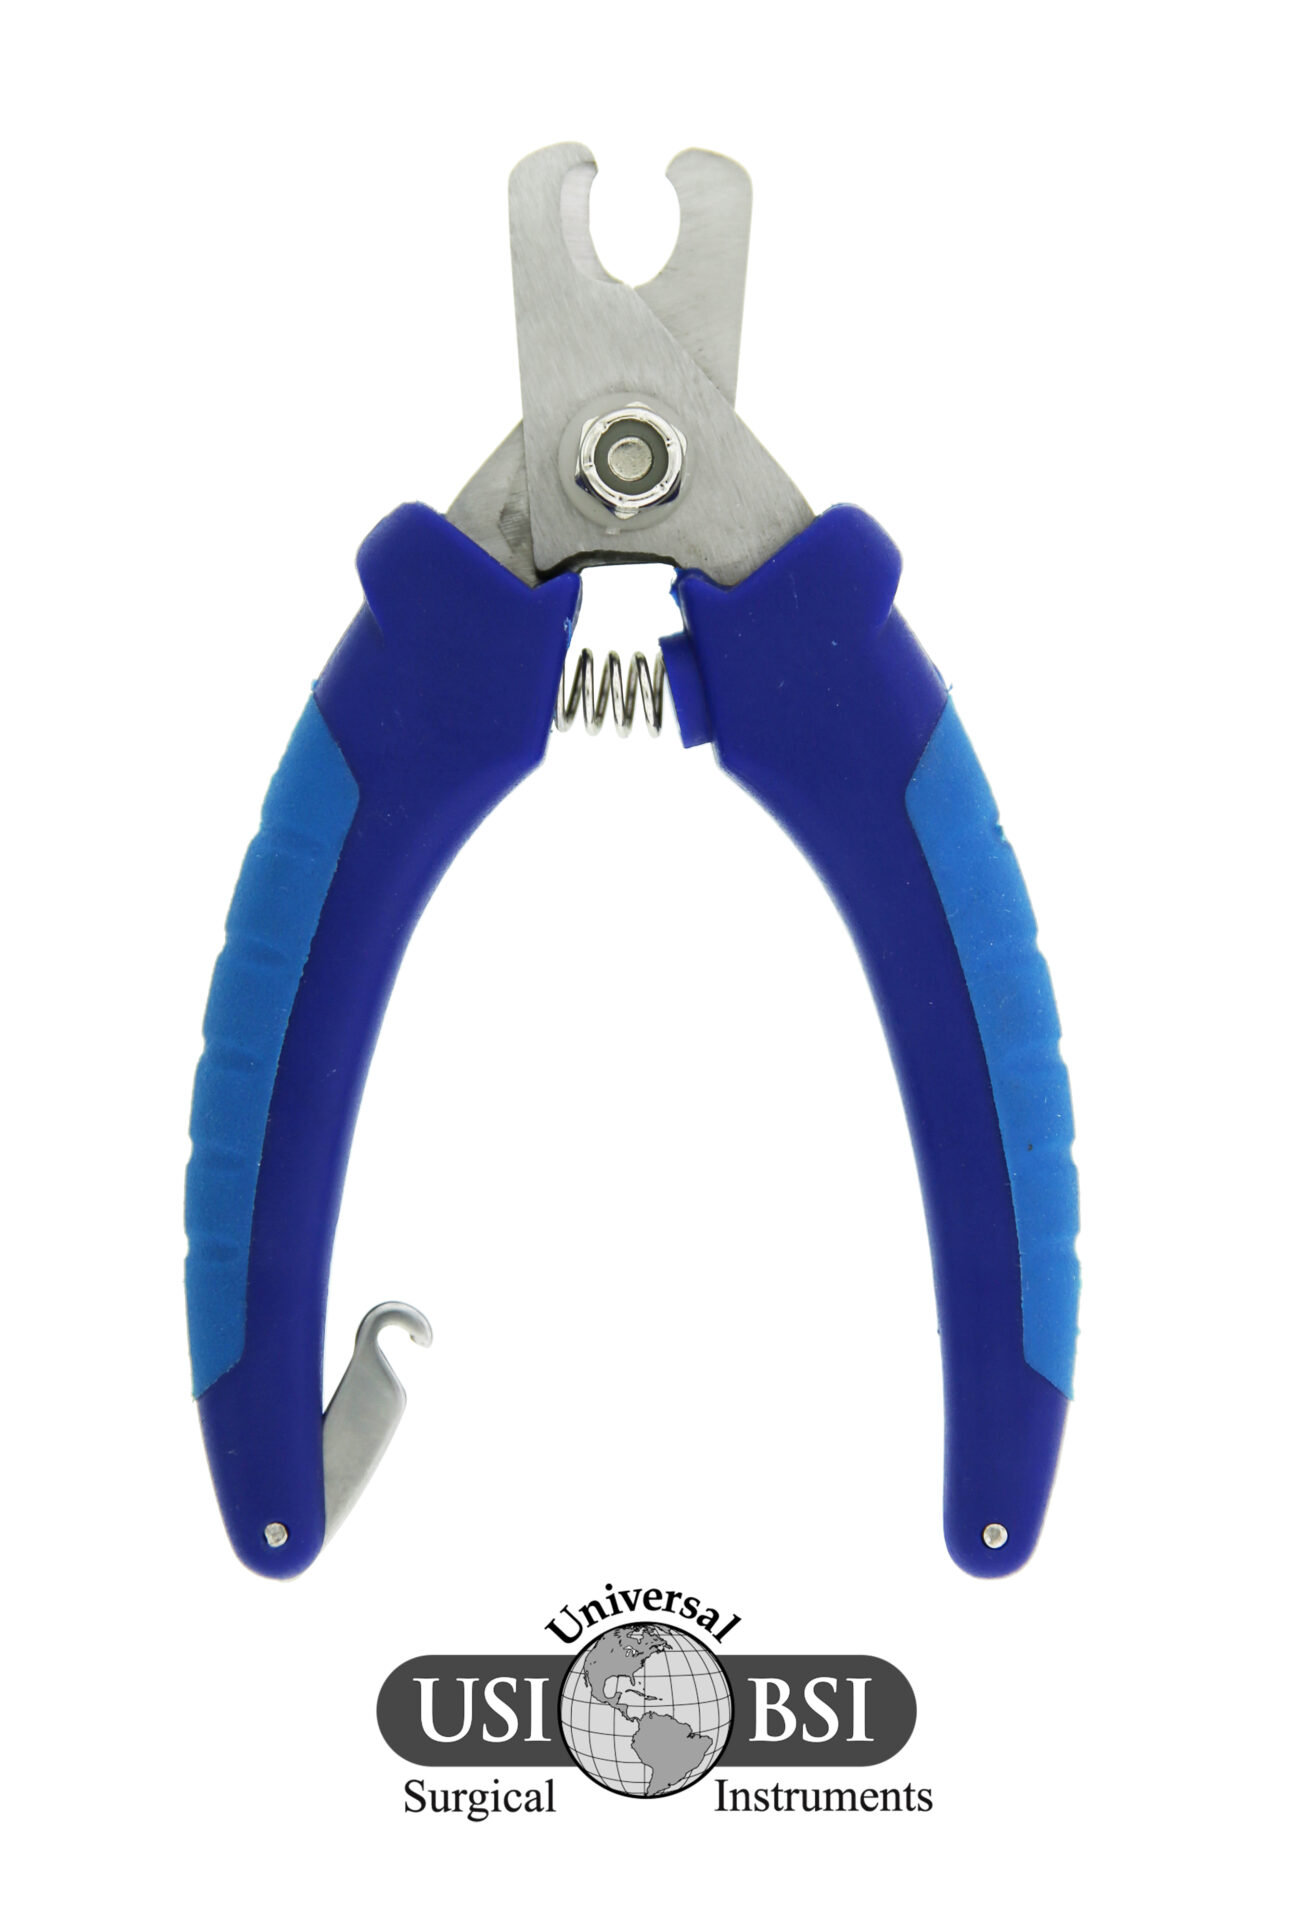 A pair of blue and silver pliers with a handle.